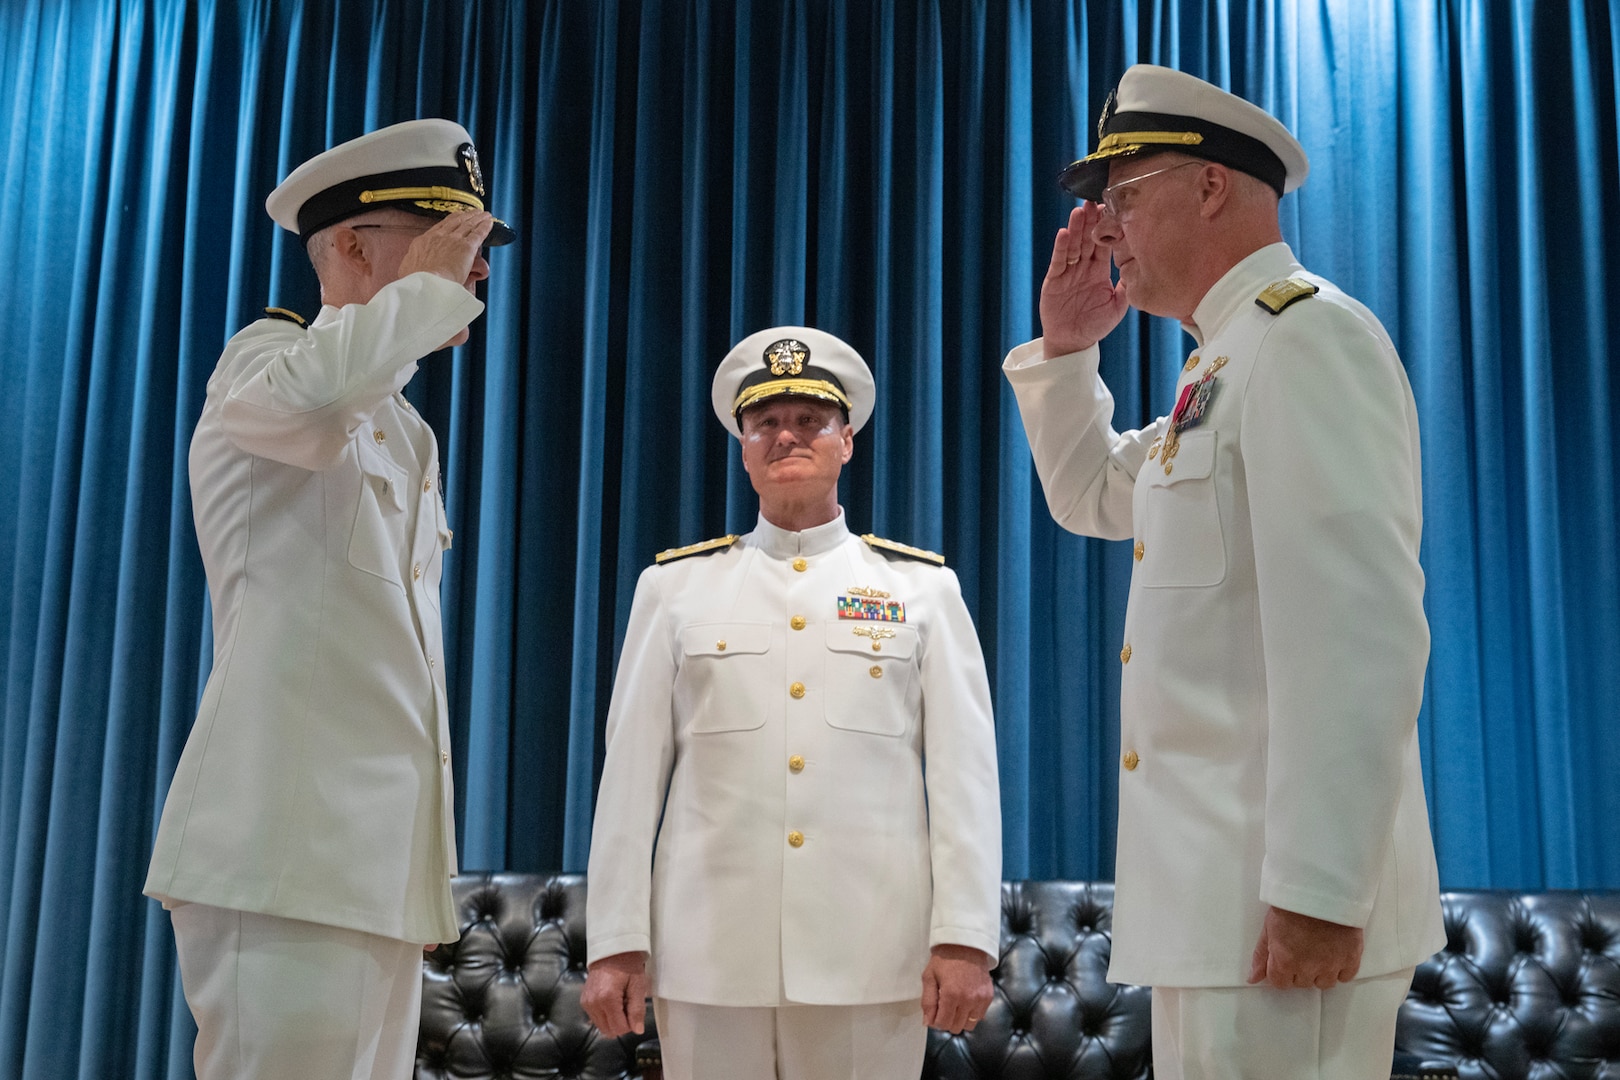 (L) Rear Adm. William Greene relieved (R) Rear Adm. Eric Ver Hage, as Commander, Navy Regional Maintenance Center (CNRMC) and Director, Surface Maintenance, Modernization and Sustainment (SEA 21) during a ceremony held at the Washington Navy Yard. Vice Admiral Bill Galinis, Commander, Naval Sea Systems Command (NAVSEA) hosted the ceremony.